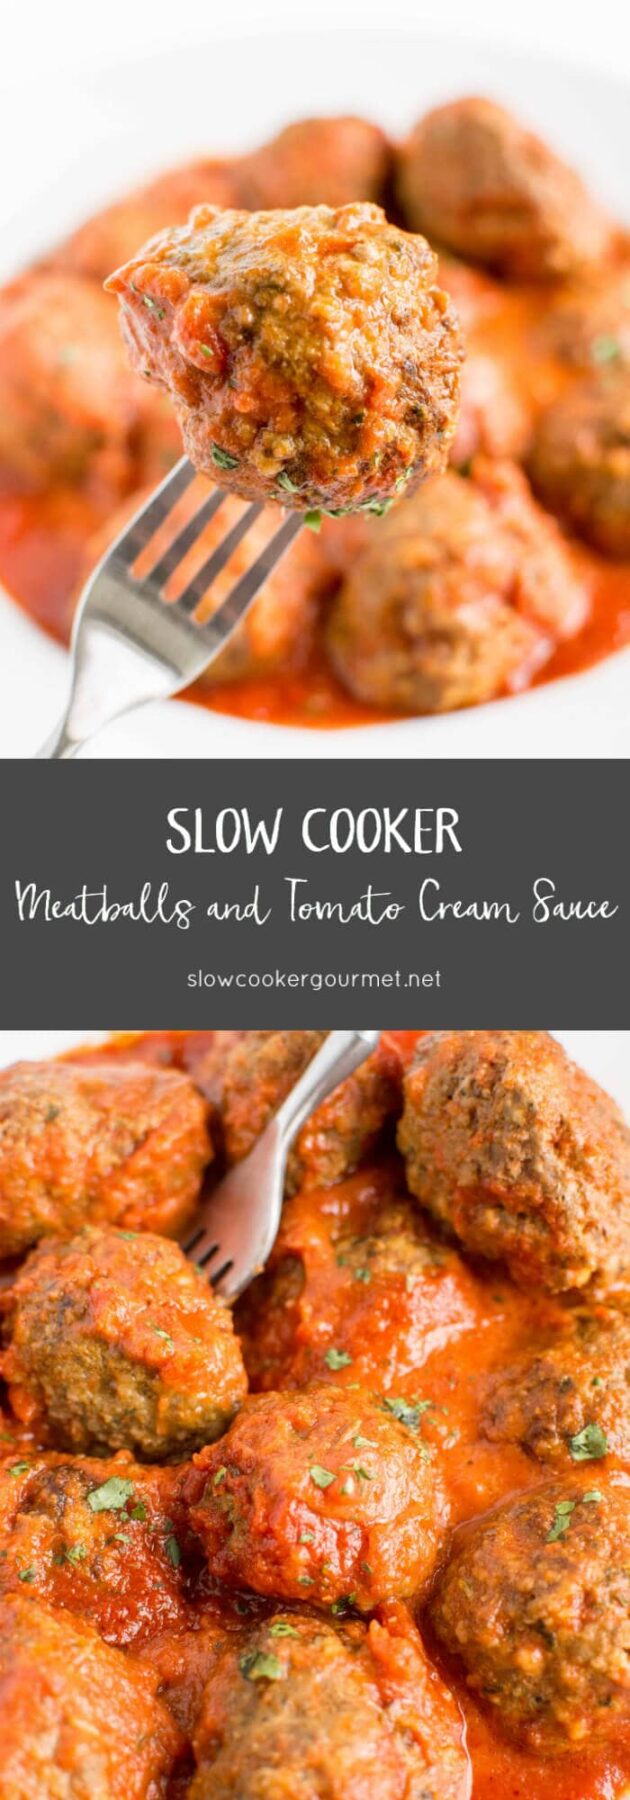 Slow Cooker Meatballs and Tomato Cream Sauce - Slow Cooker Gourmet